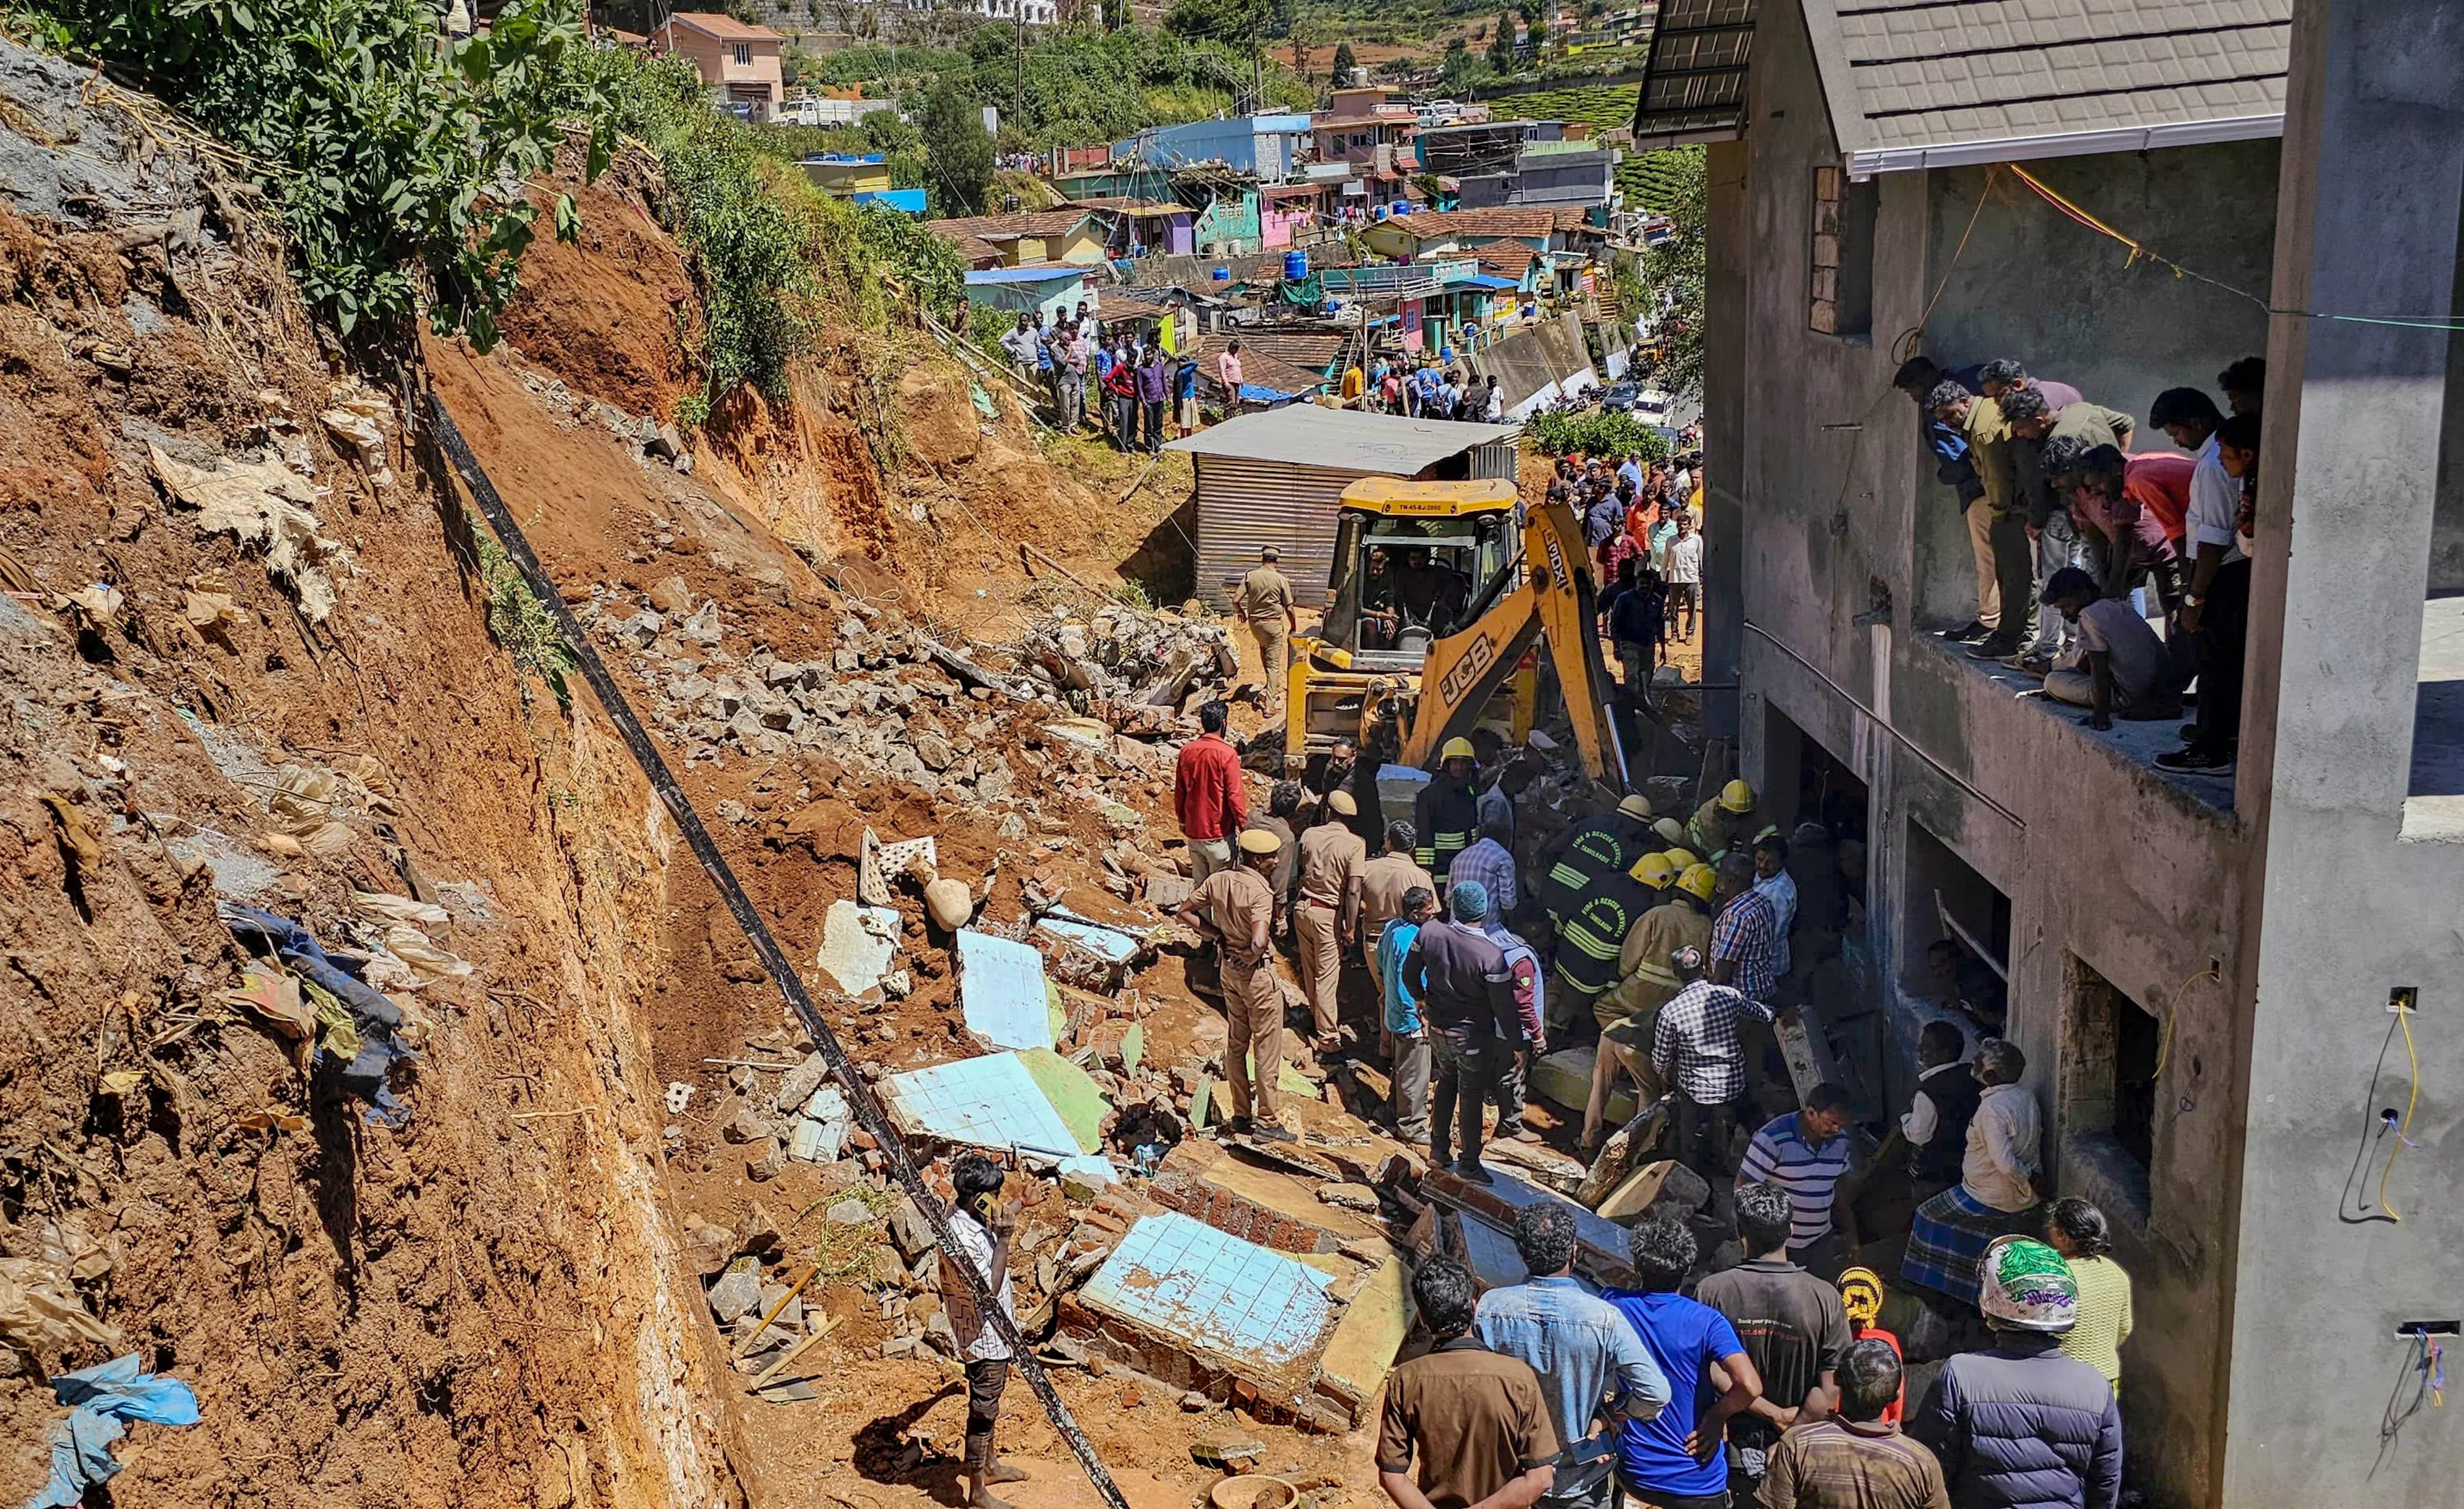 Six women workers killed as earth caves in at Ooty construction site